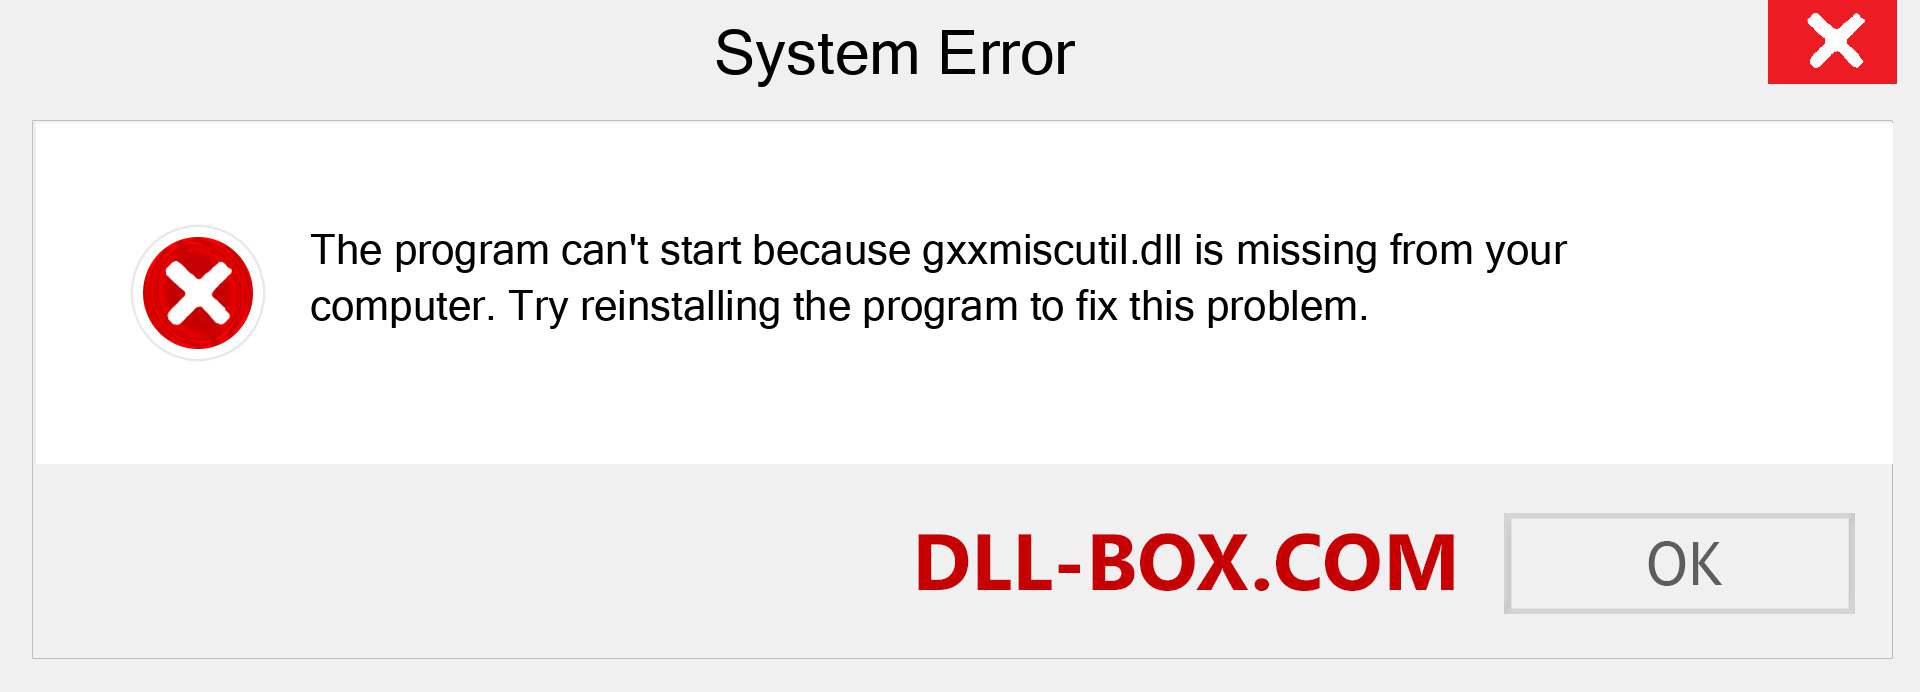  gxxmiscutil.dll file is missing?. Download for Windows 7, 8, 10 - Fix  gxxmiscutil dll Missing Error on Windows, photos, images